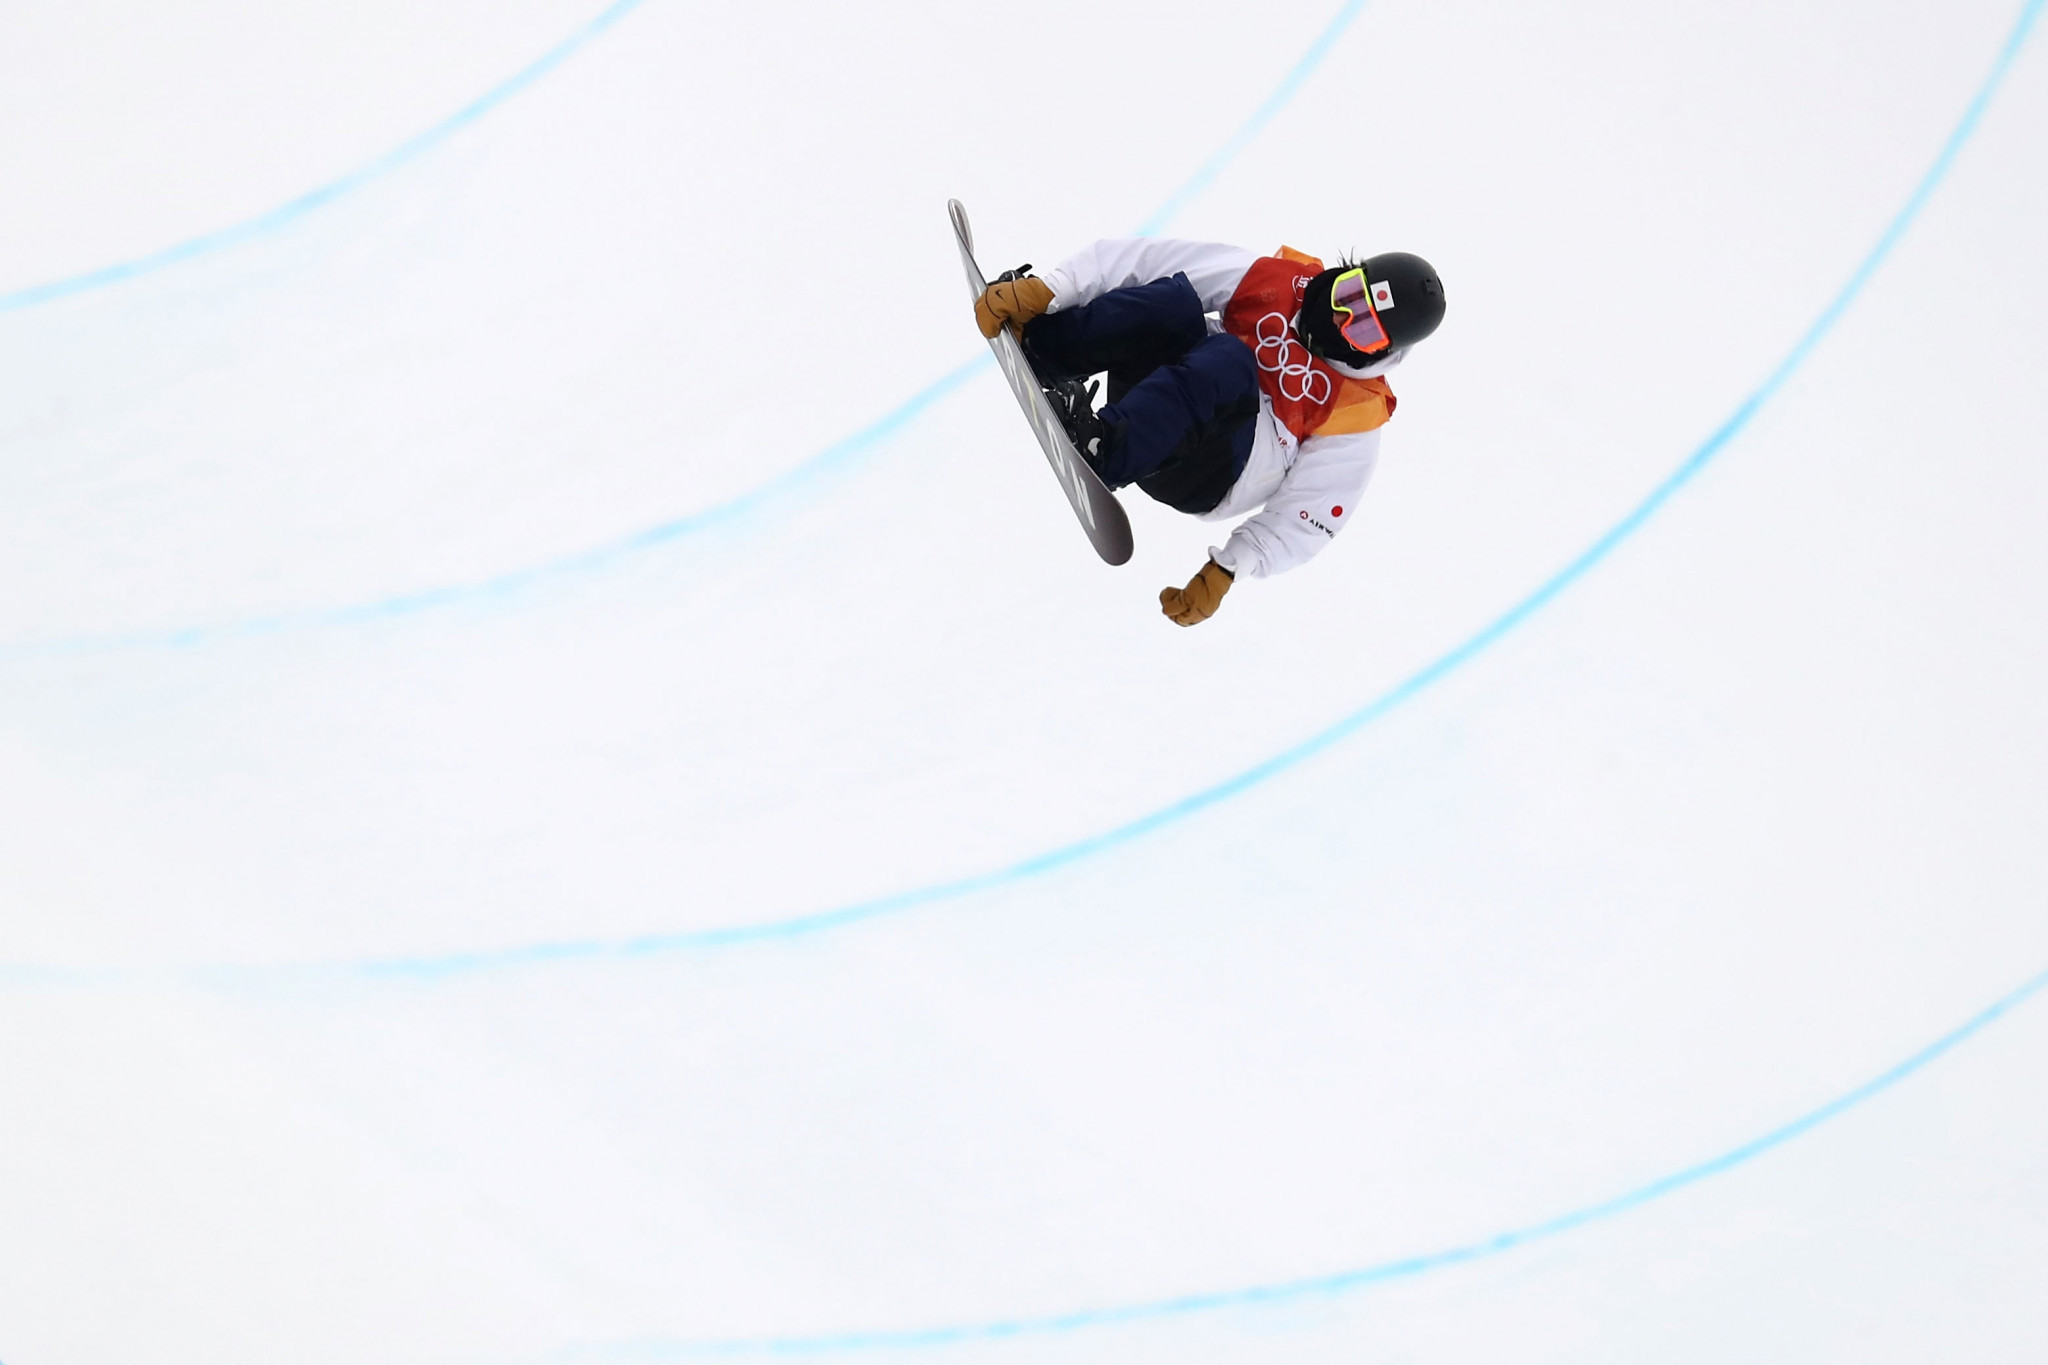 Japan's Ayumu Hirano finished in the silver medal position for the second consecutive Winter Olympic Games ©Getty Images